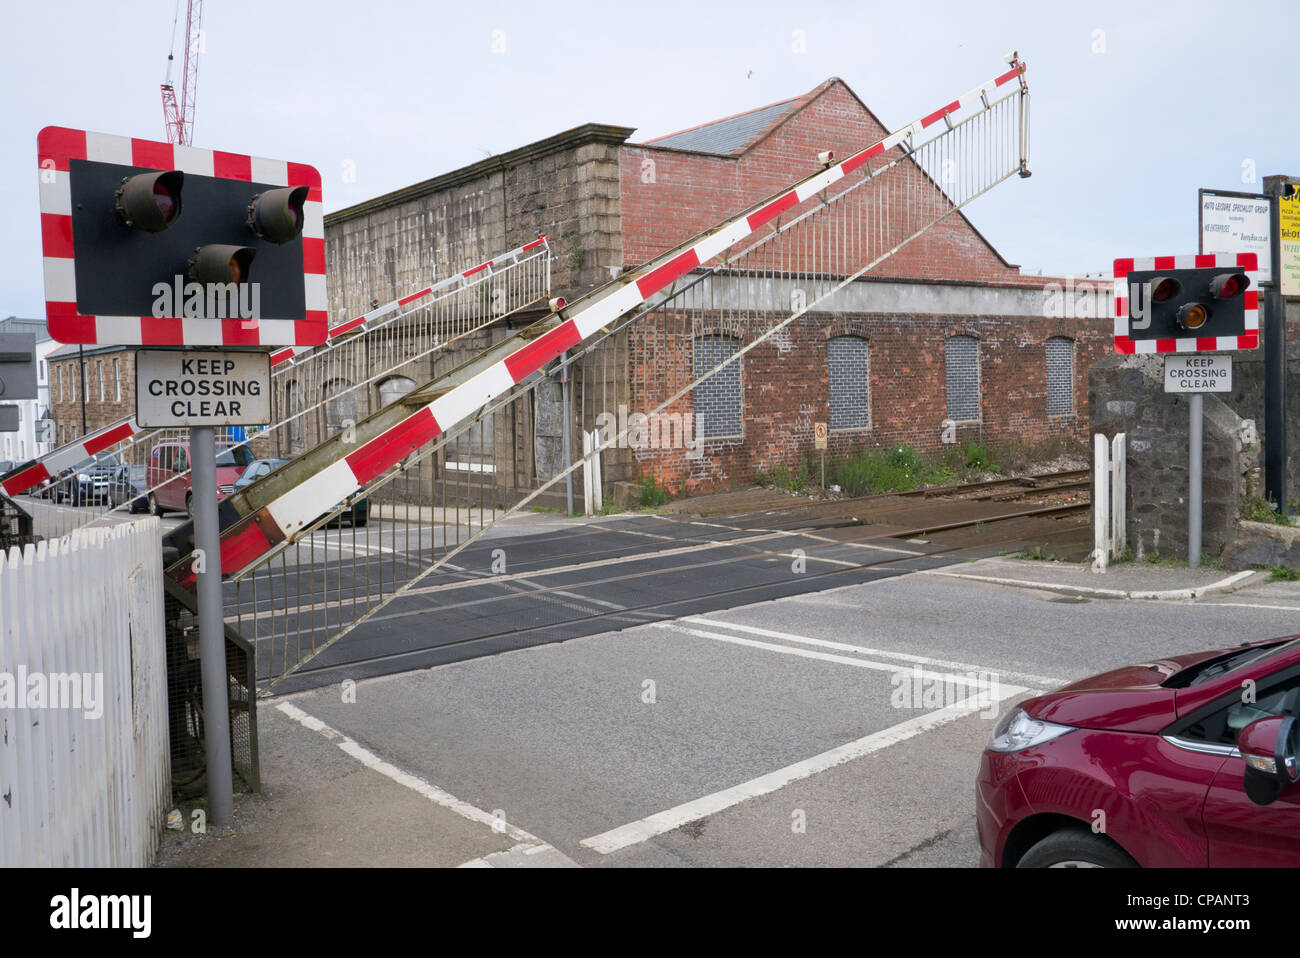 British railway level crossing barrier gate being raised after a train has passed through in Camborne, UK. Stock Photo